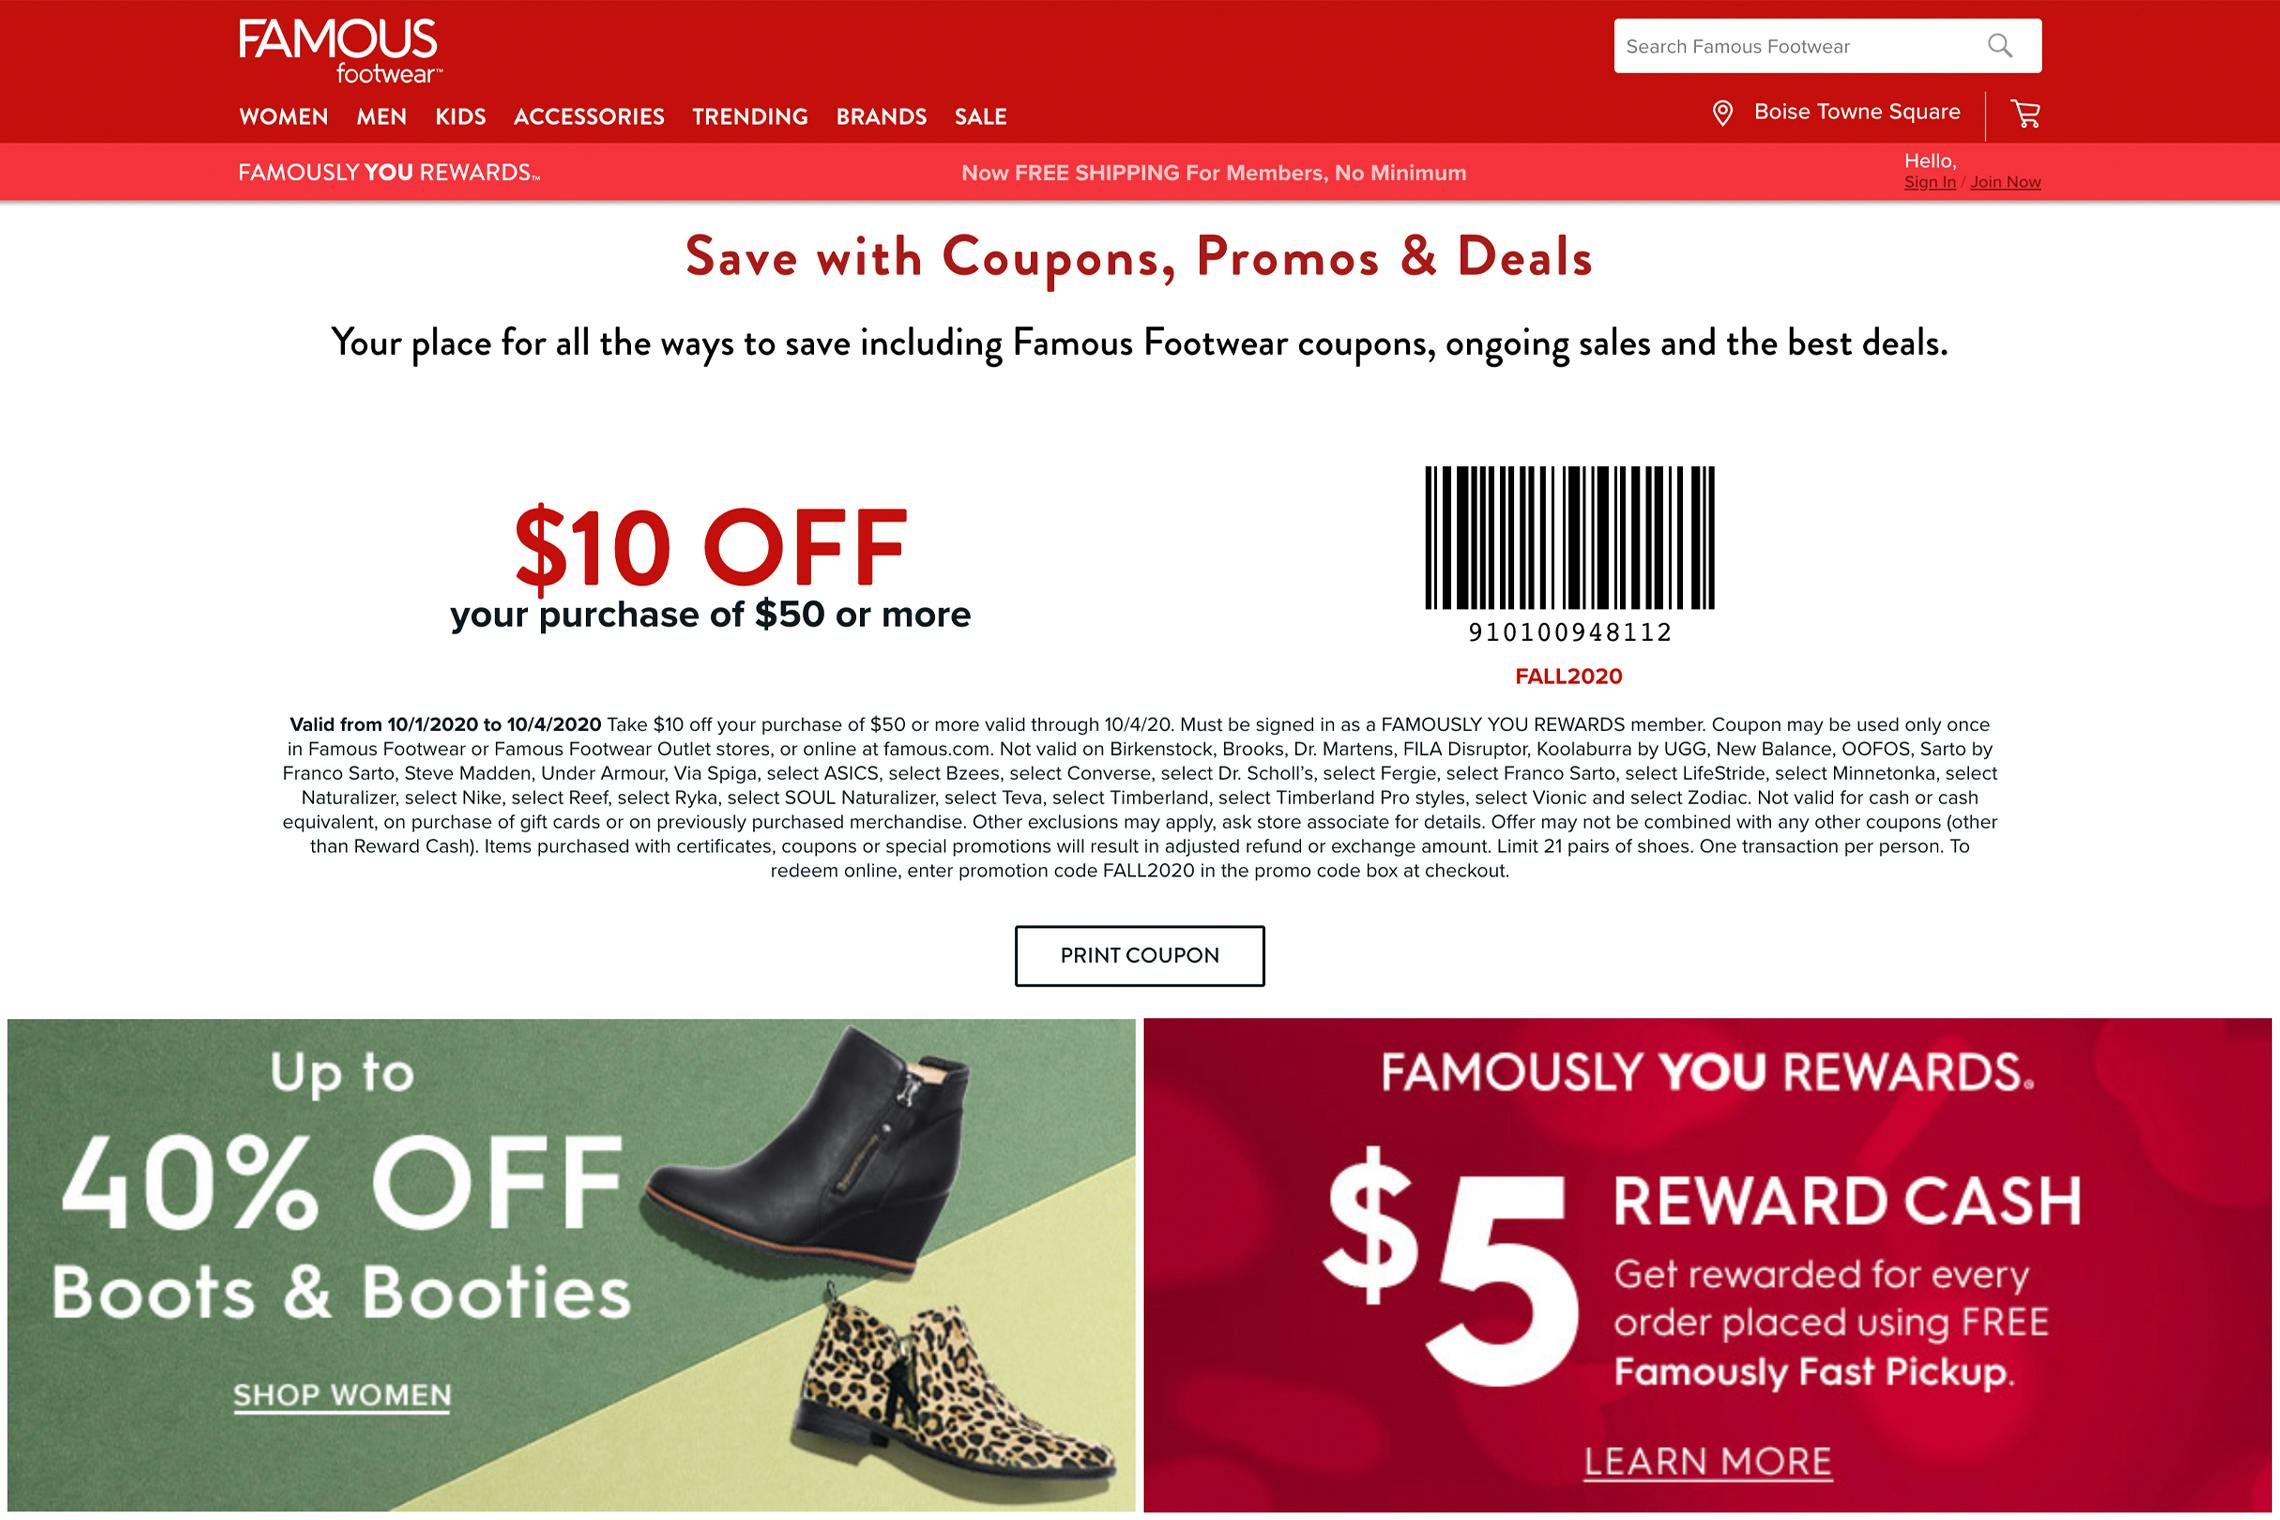 16 Famous Footwear Coupons and Tricks for Deals on Kicks The Krazy